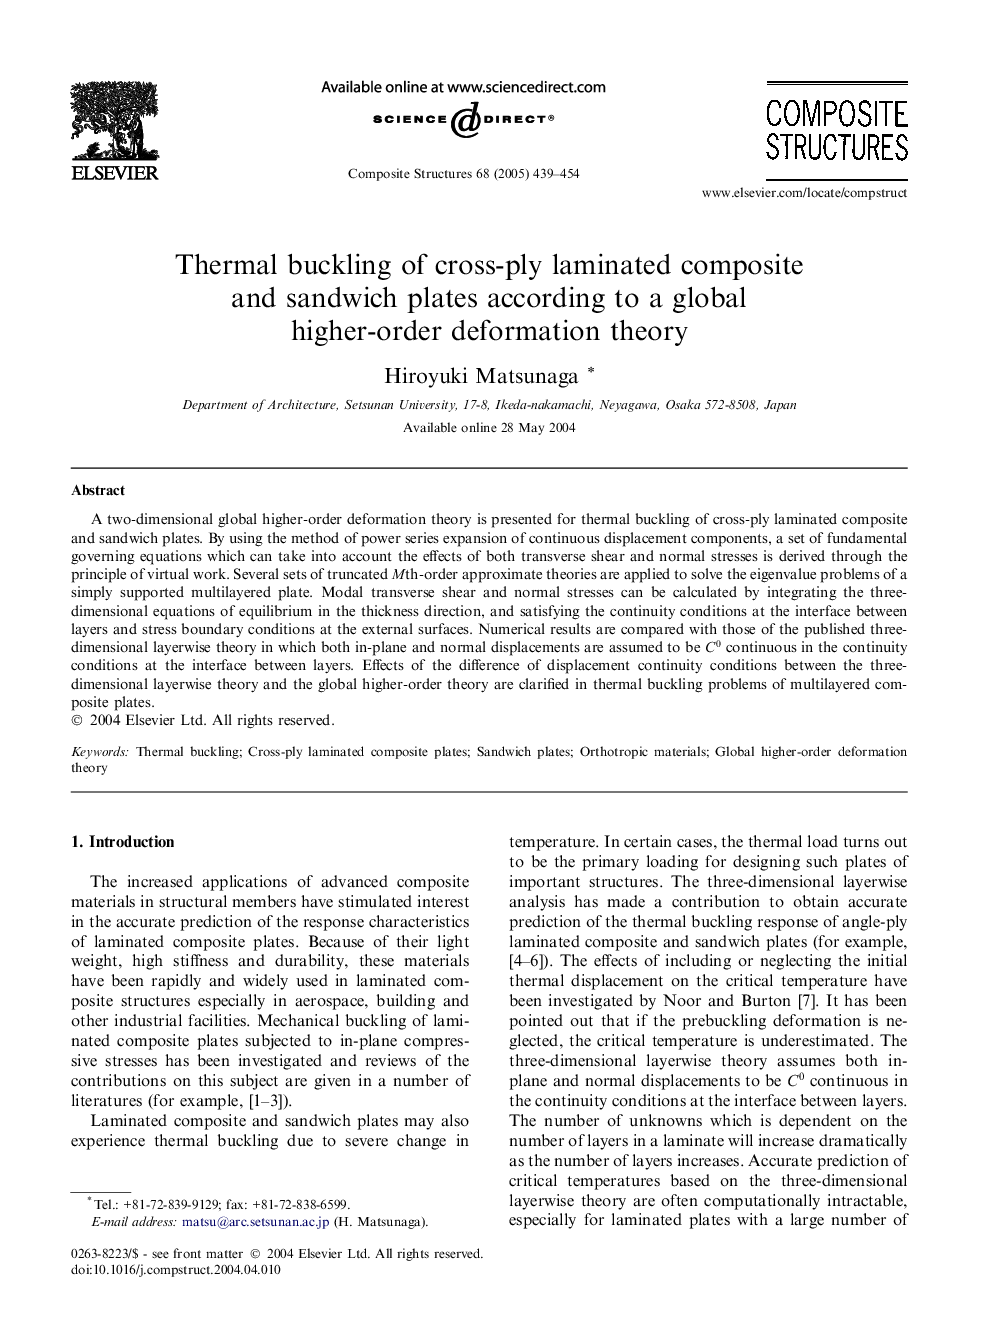 Thermal buckling of cross-ply laminated composite and sandwich plates according to a global higher-order deformation theory